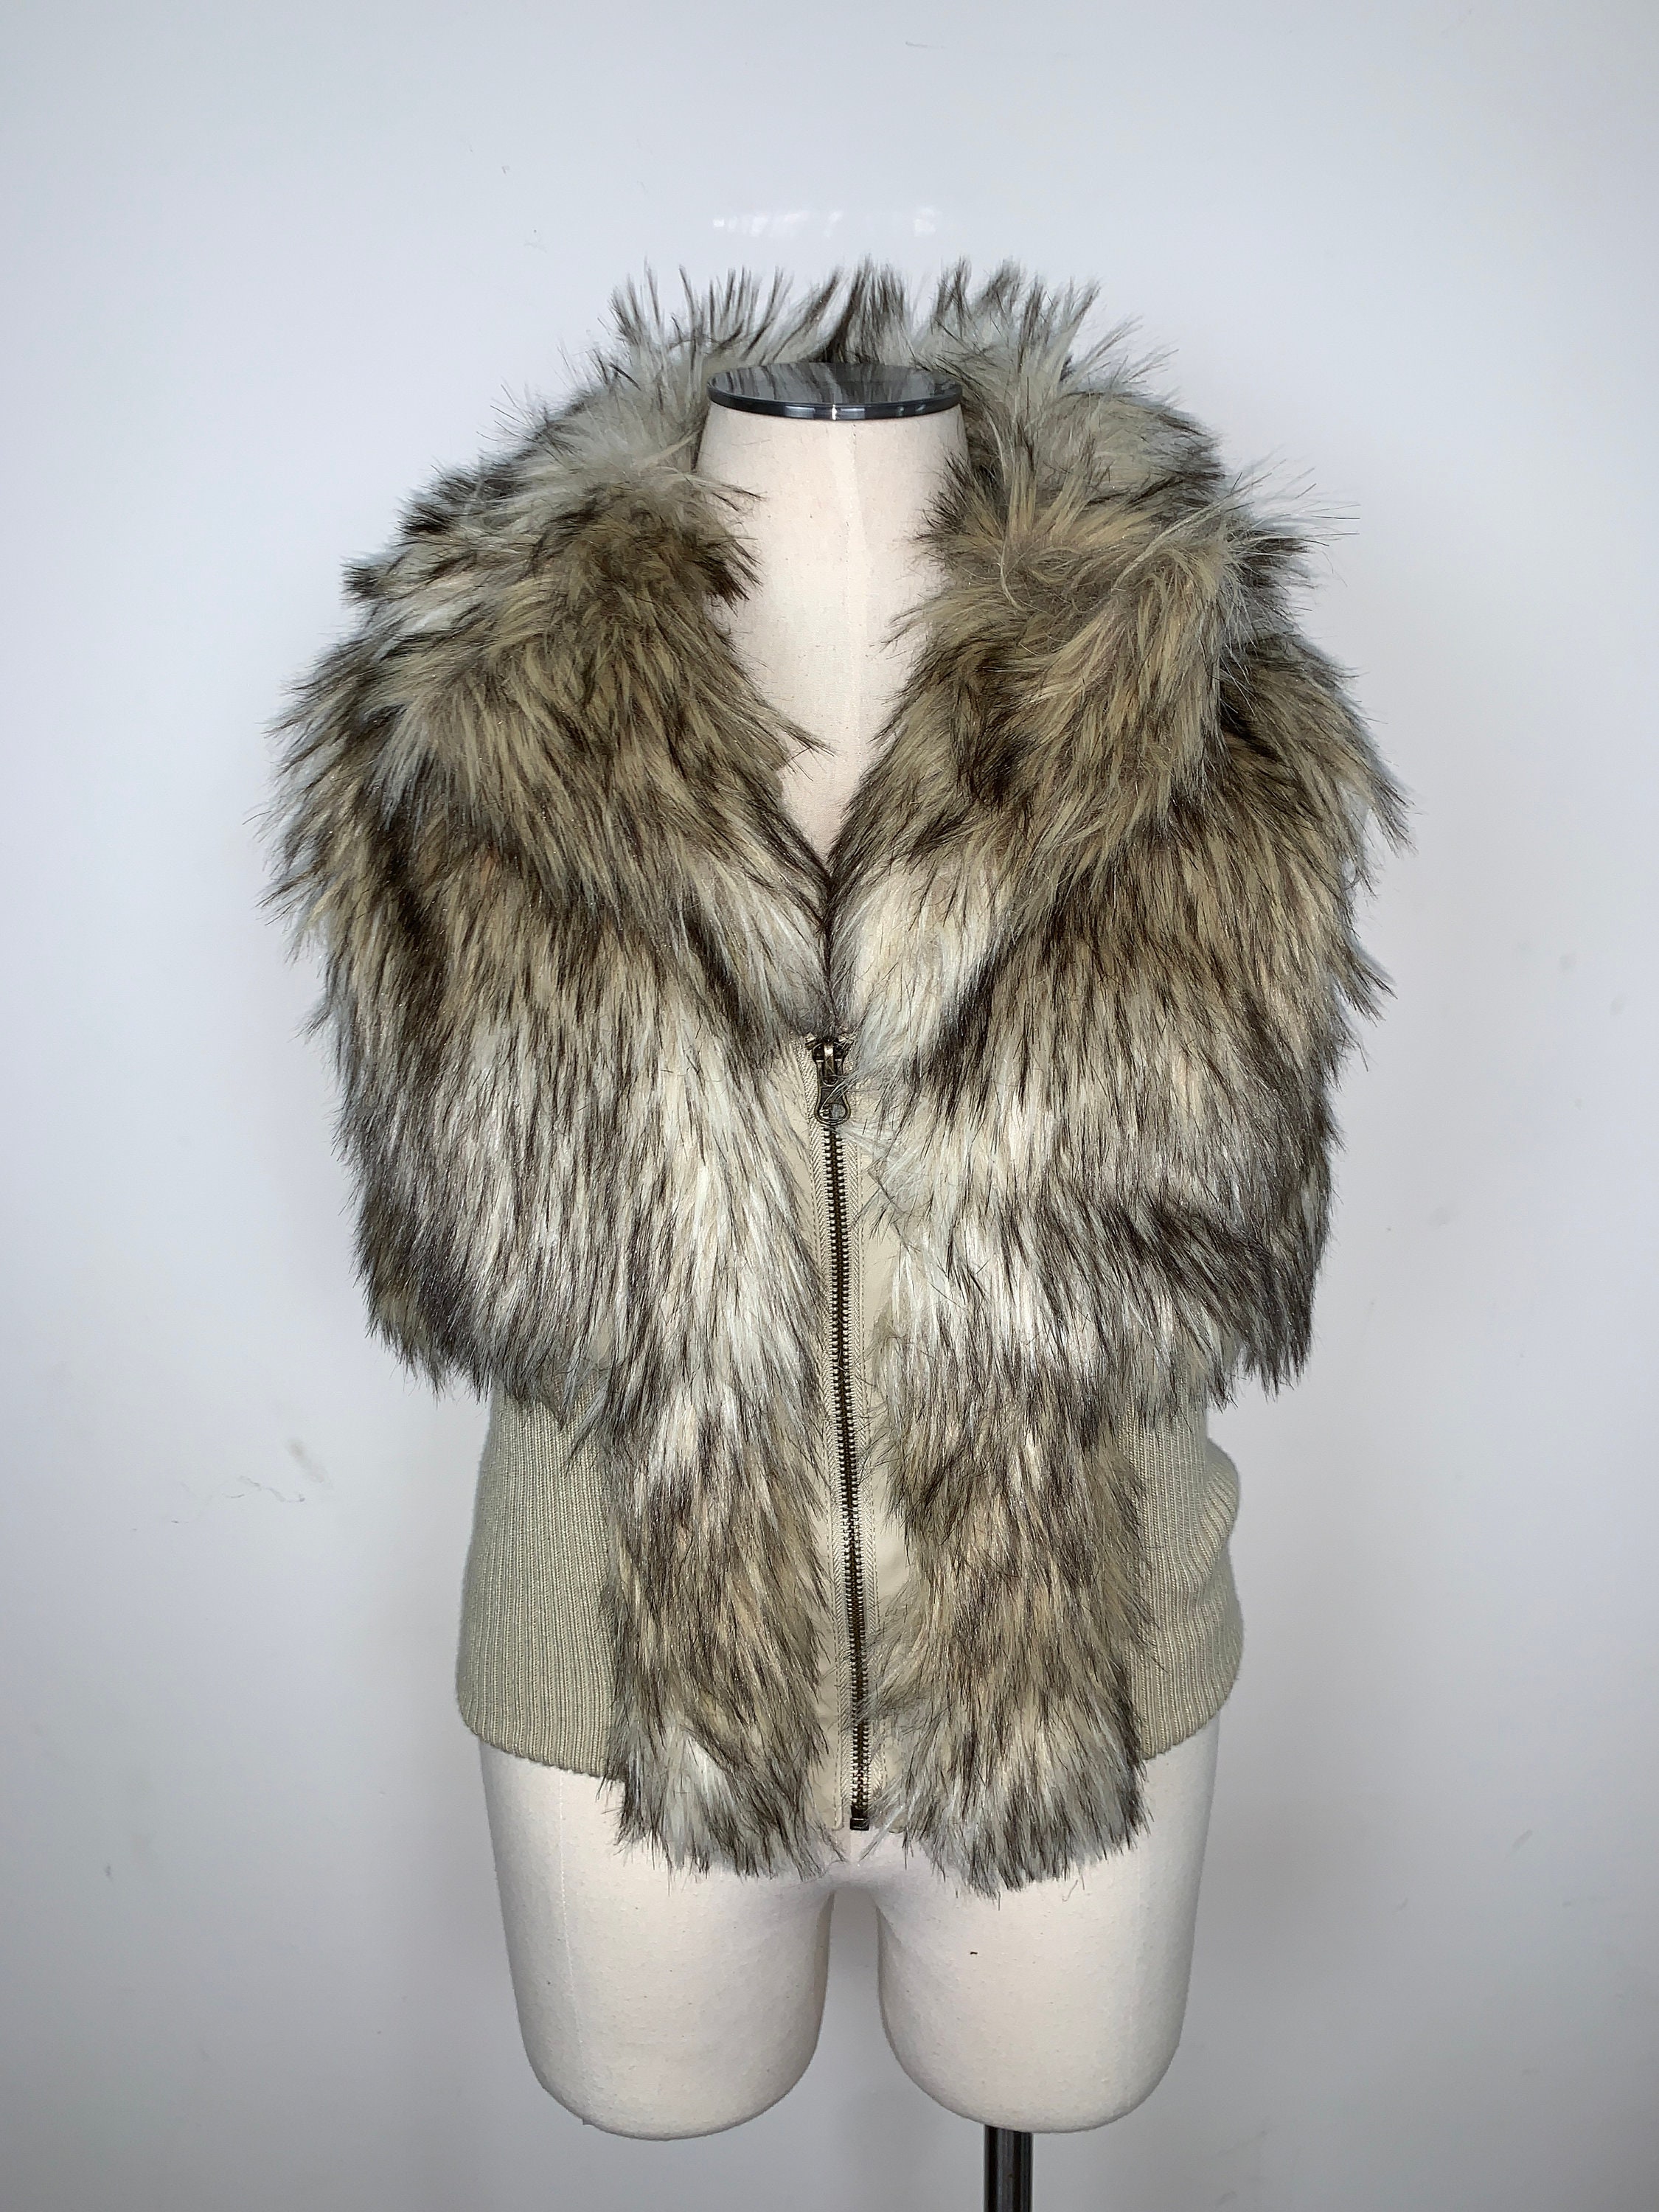 Women's Vintage V-Neck Fuzzy Vest Faux Shearling Shaggy Sleeveless Jacket Casual Button Down with Zipper Pockets 